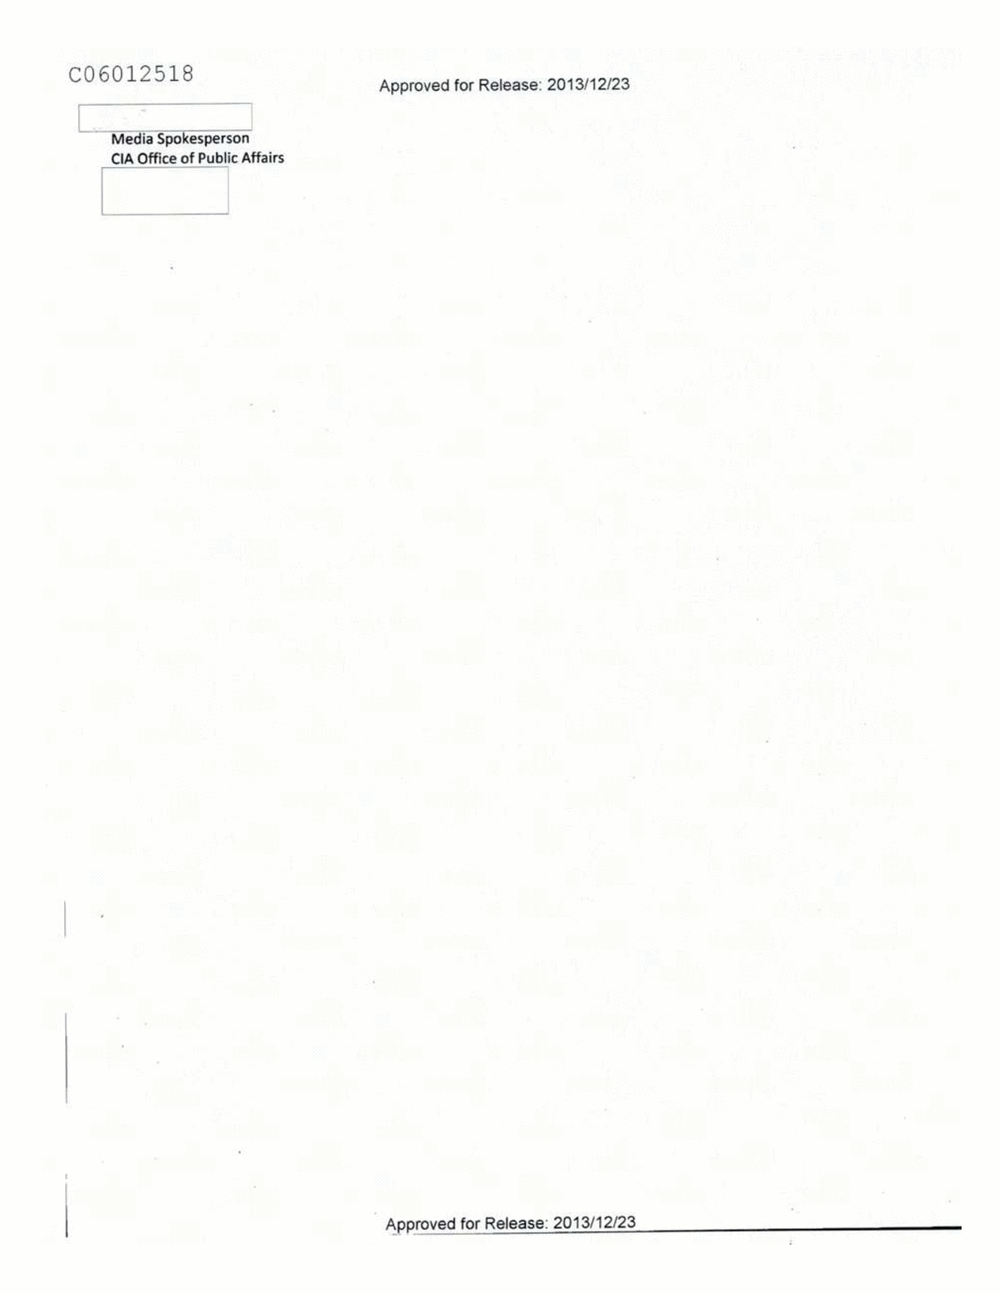 Page 38 from Email Correspondence Between Reporters and CIA Flacks